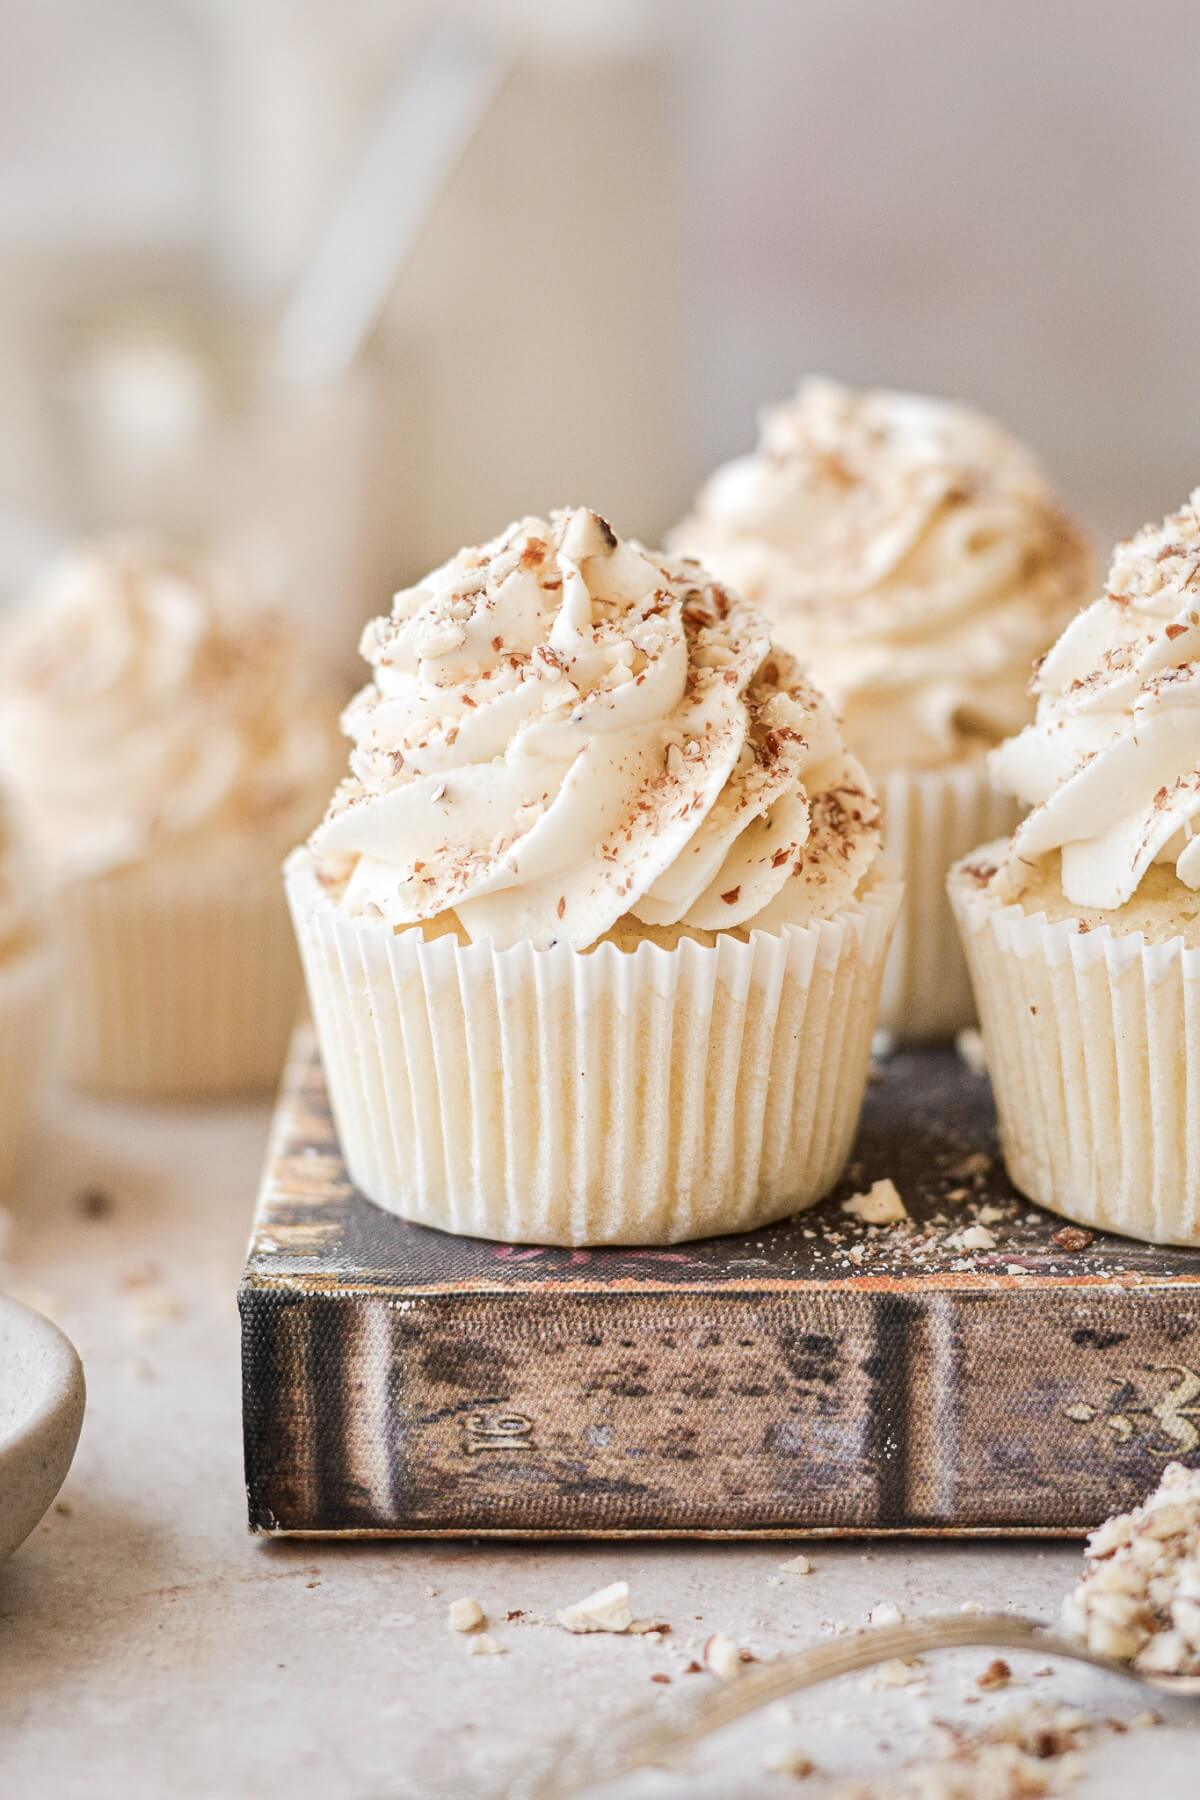 Almond cupcakes sprinkled with chopped almonds.